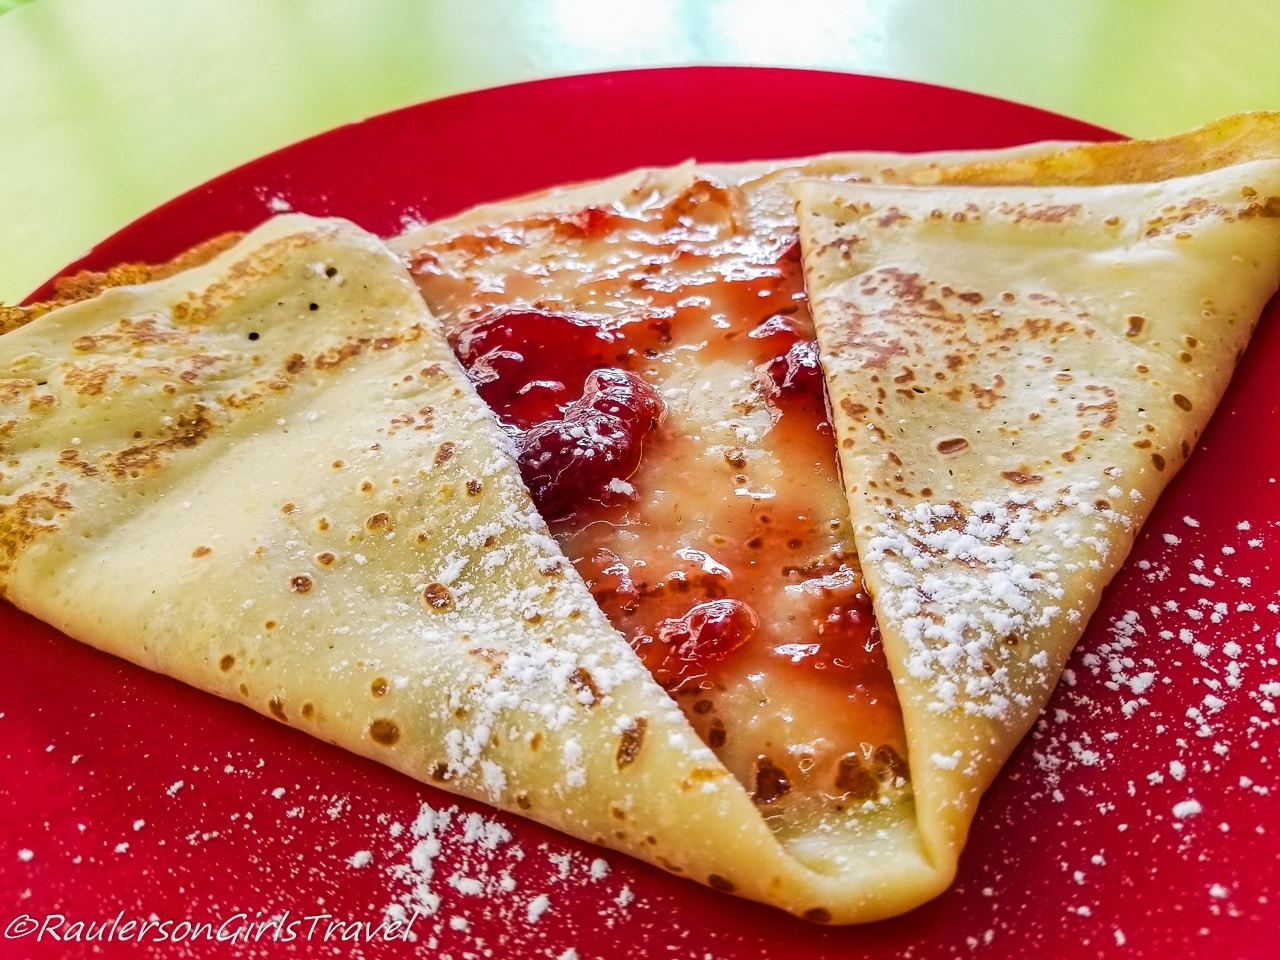 Strawberry Crepe in France